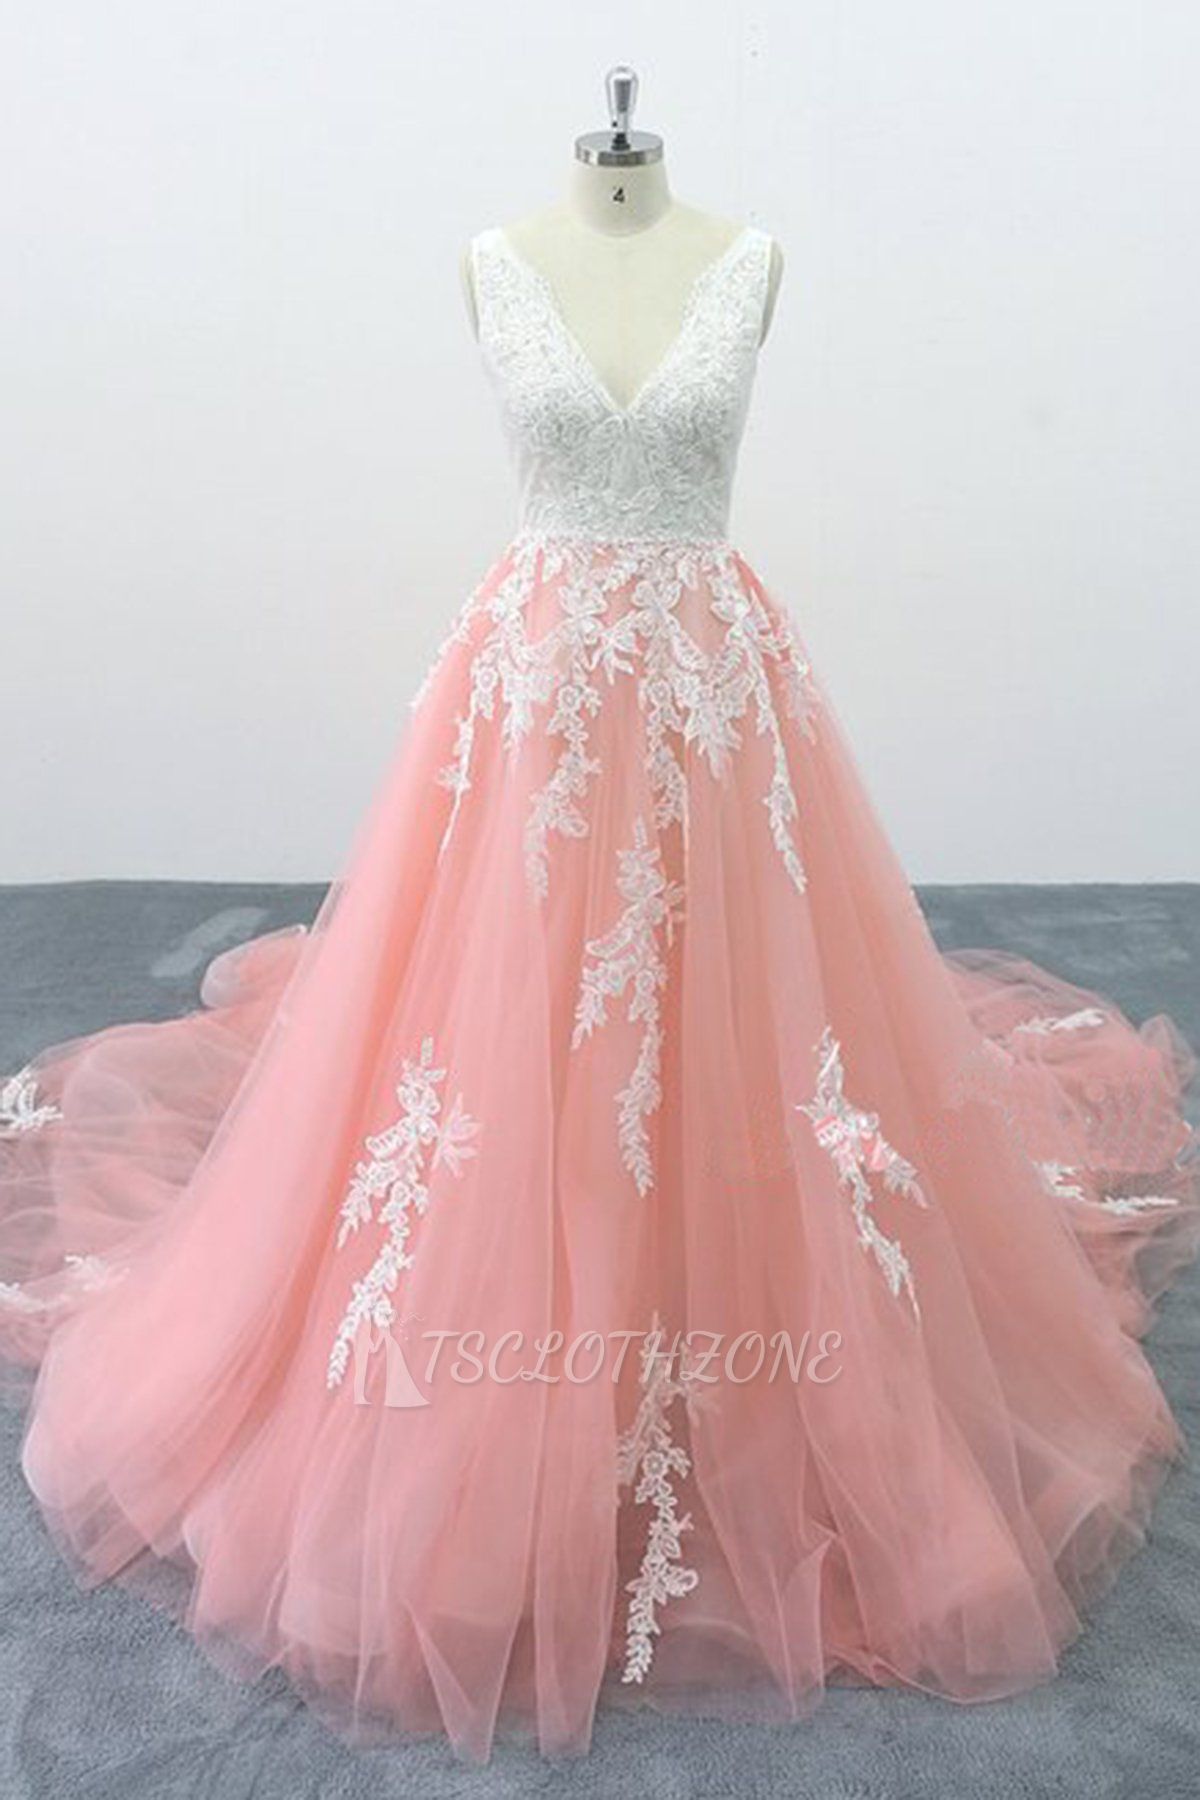 TsClothzone Chic Peach Pink Tulle Lace Wedding Dress Cathedral Train Bridal Gowns On Sale